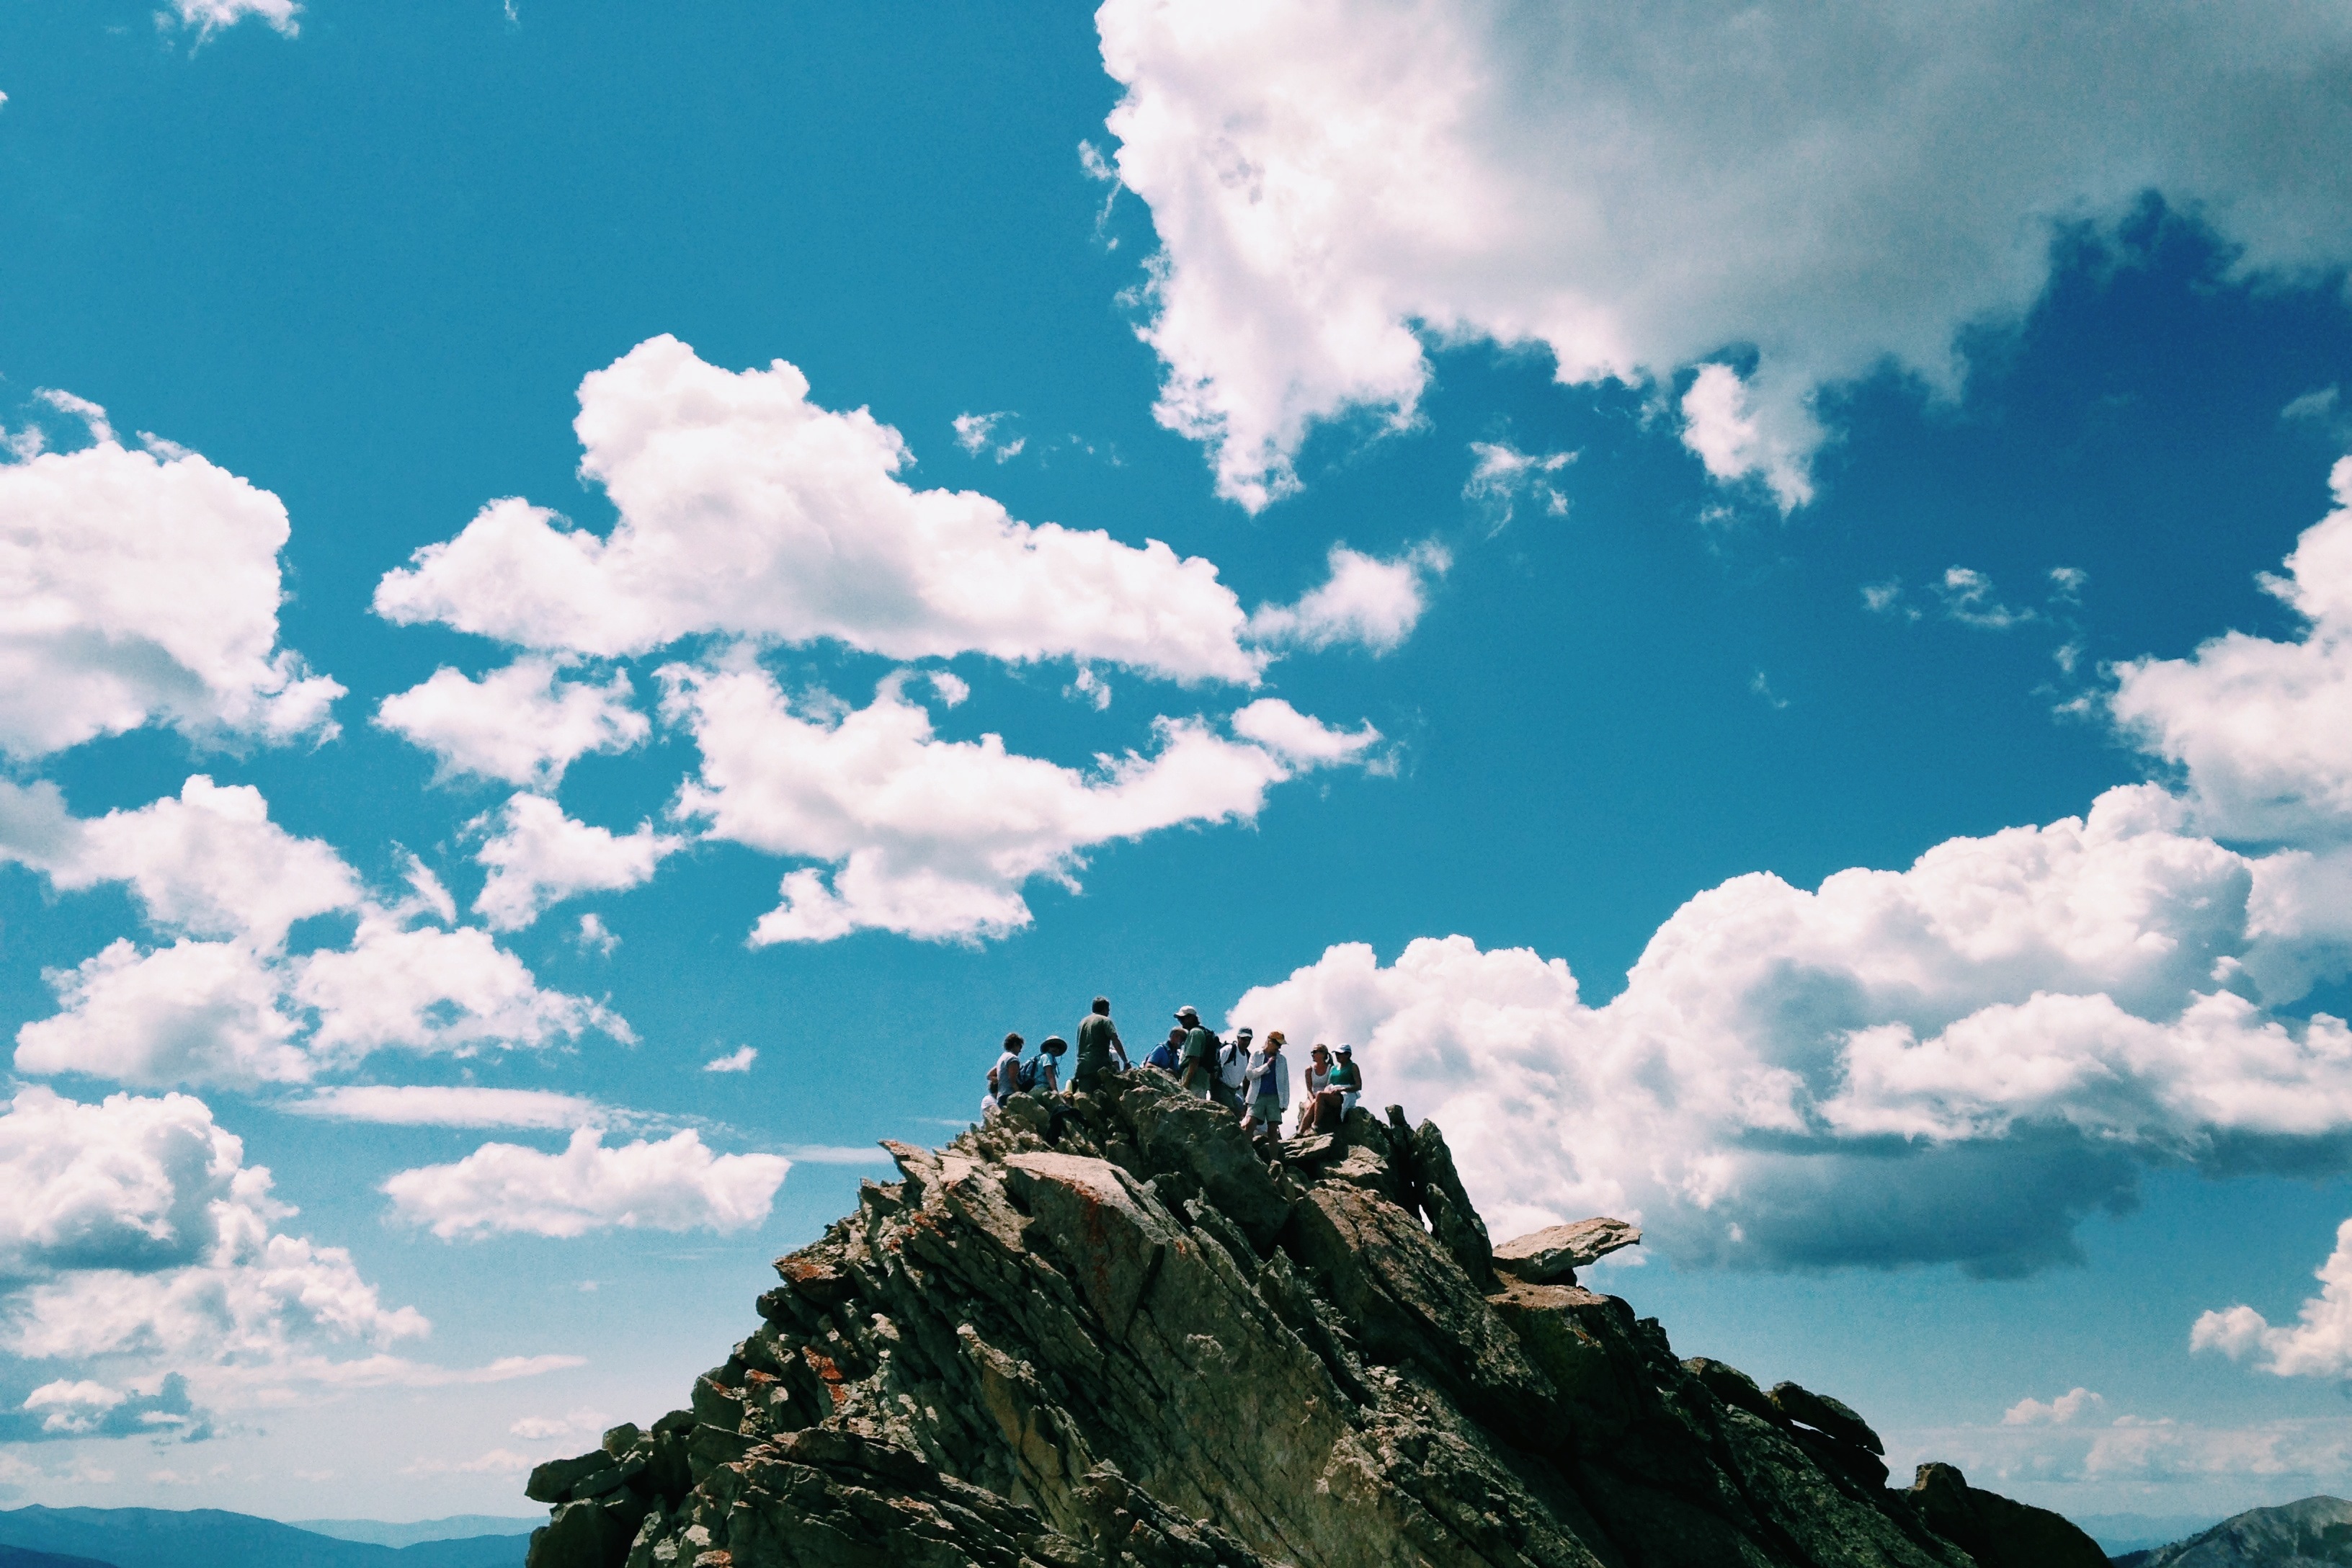 image of a group of 9 people on top of a mountain - IBEX Payroll is a Canadian online payroll service focused on small business and non-profits.